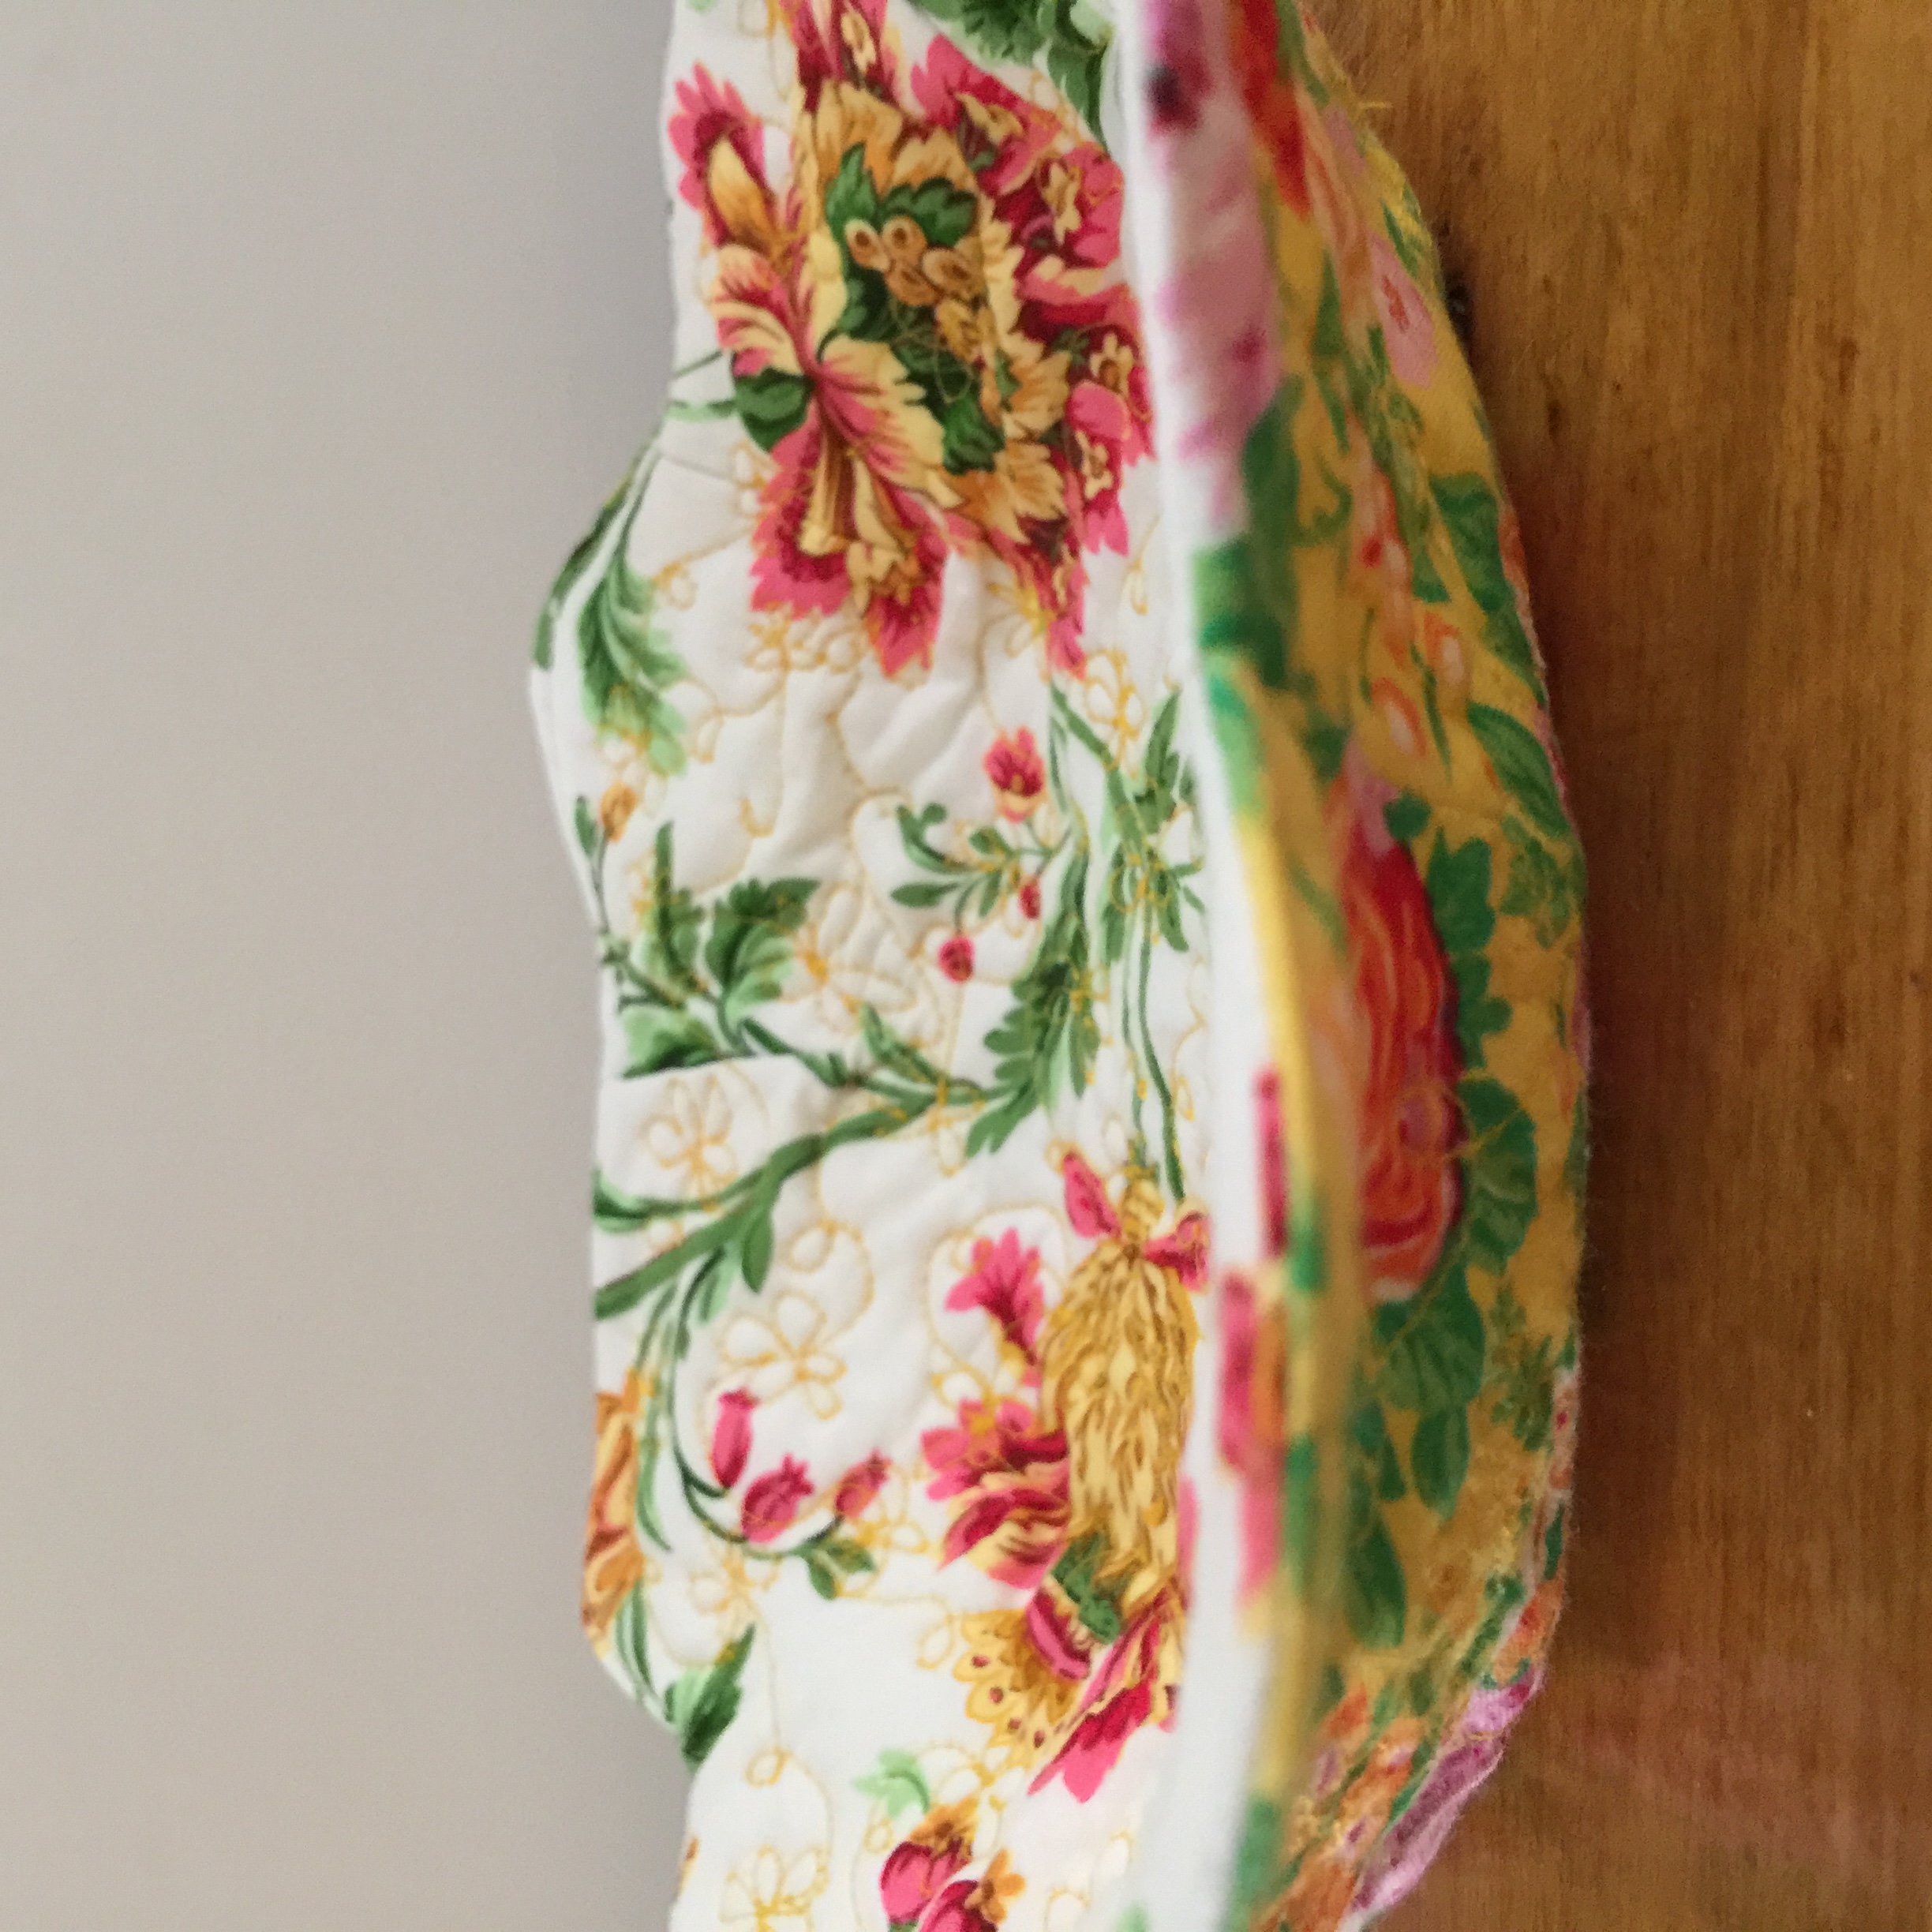 How to make quilted microwave bowl cozy holders - Tulip Square ~ Patterns  for useful quilted goods